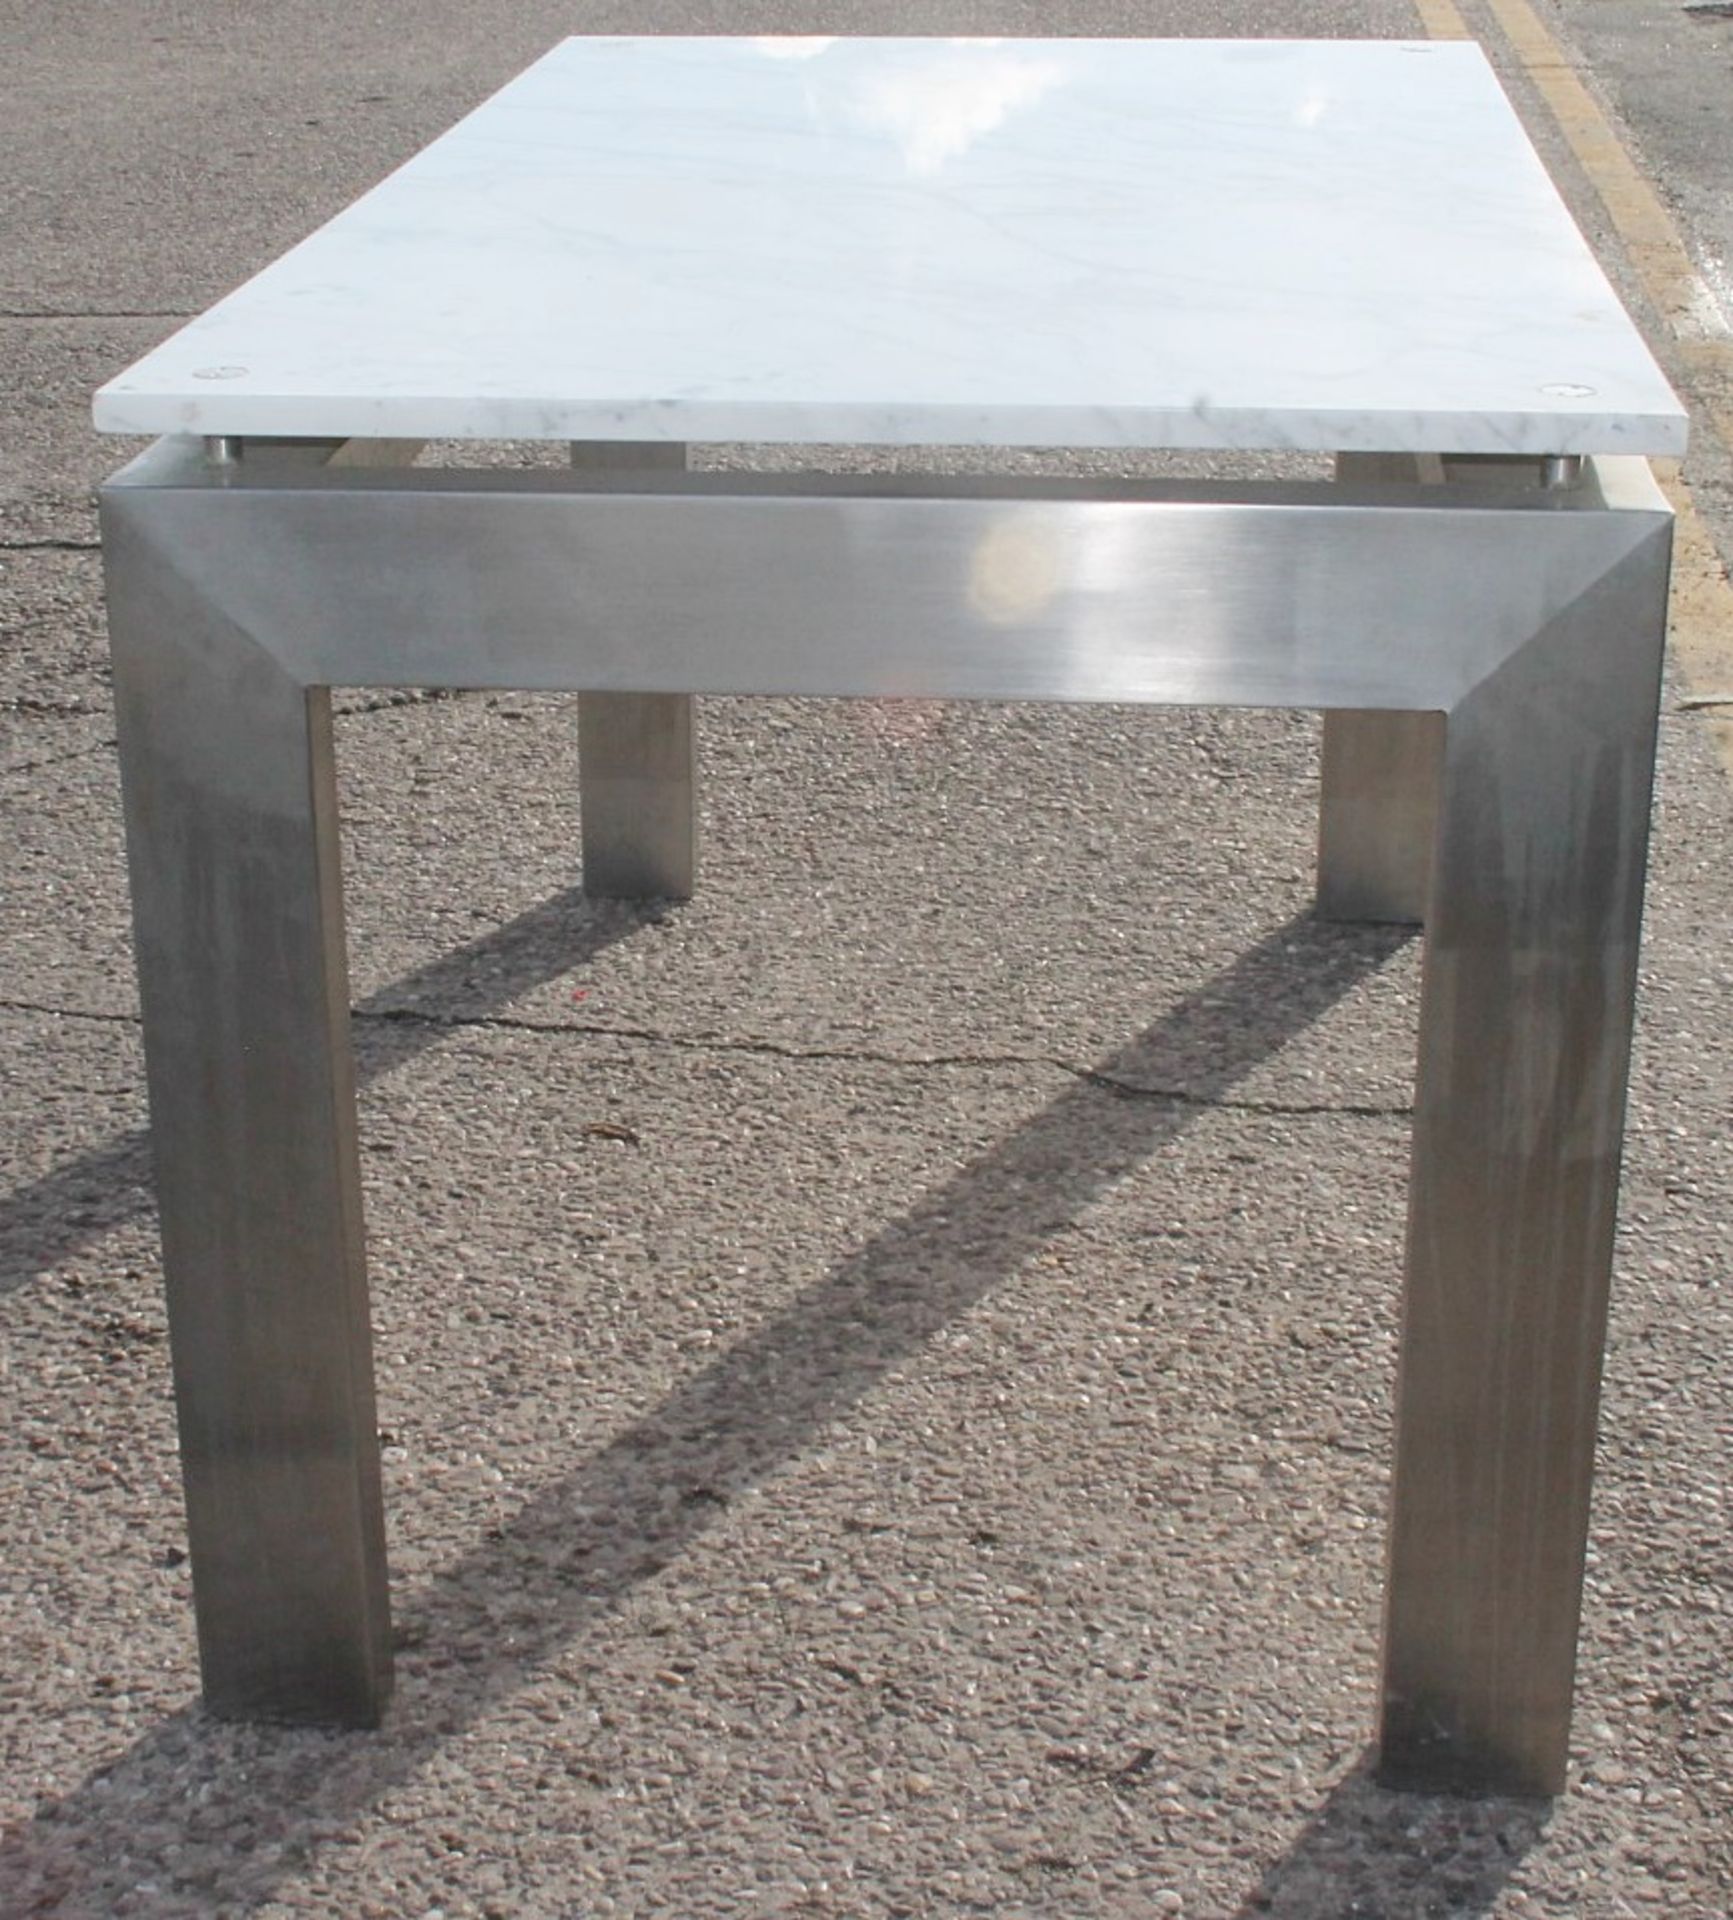 1 x Marble-Topped, Steel Framed Retail Display Table - Recently Removed From A World-renowned London - Image 2 of 2